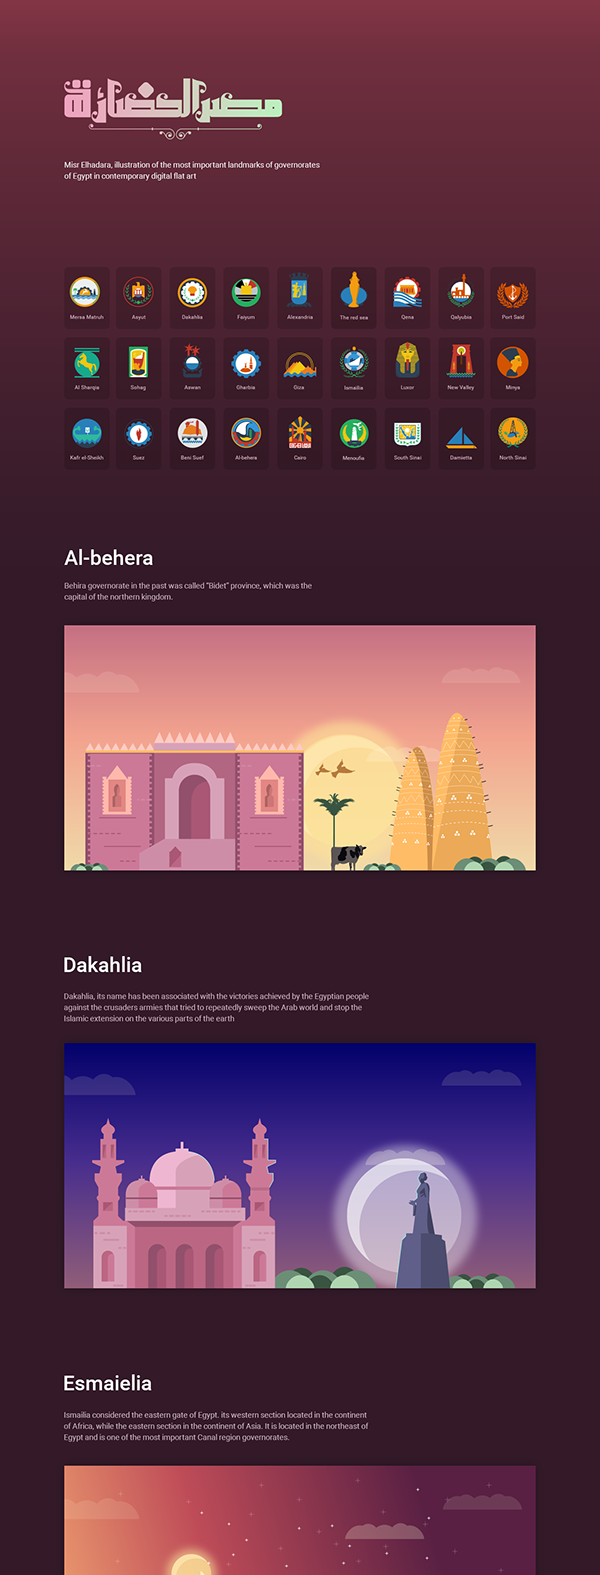 Free 28 open source files of Egypt governorates on Behance